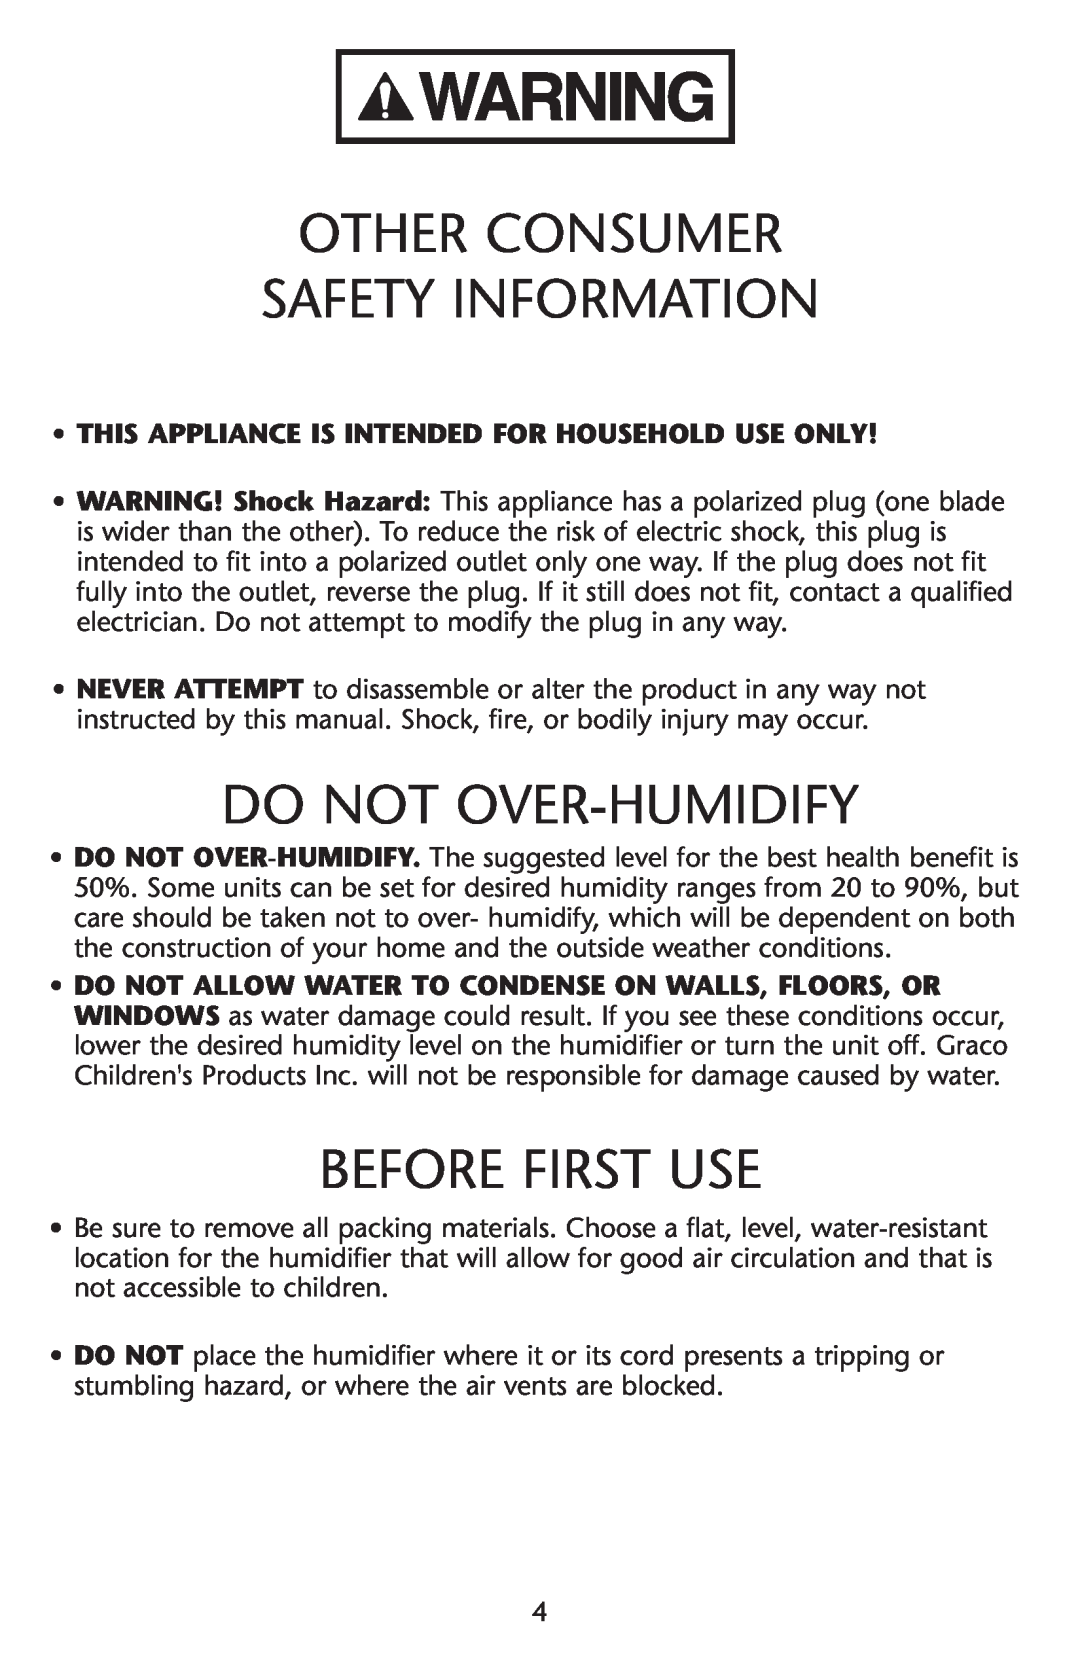 Graco ISPD023AB owner manual Other Consumer Safety Information, Do Not Over-Humidify, Before First Use 